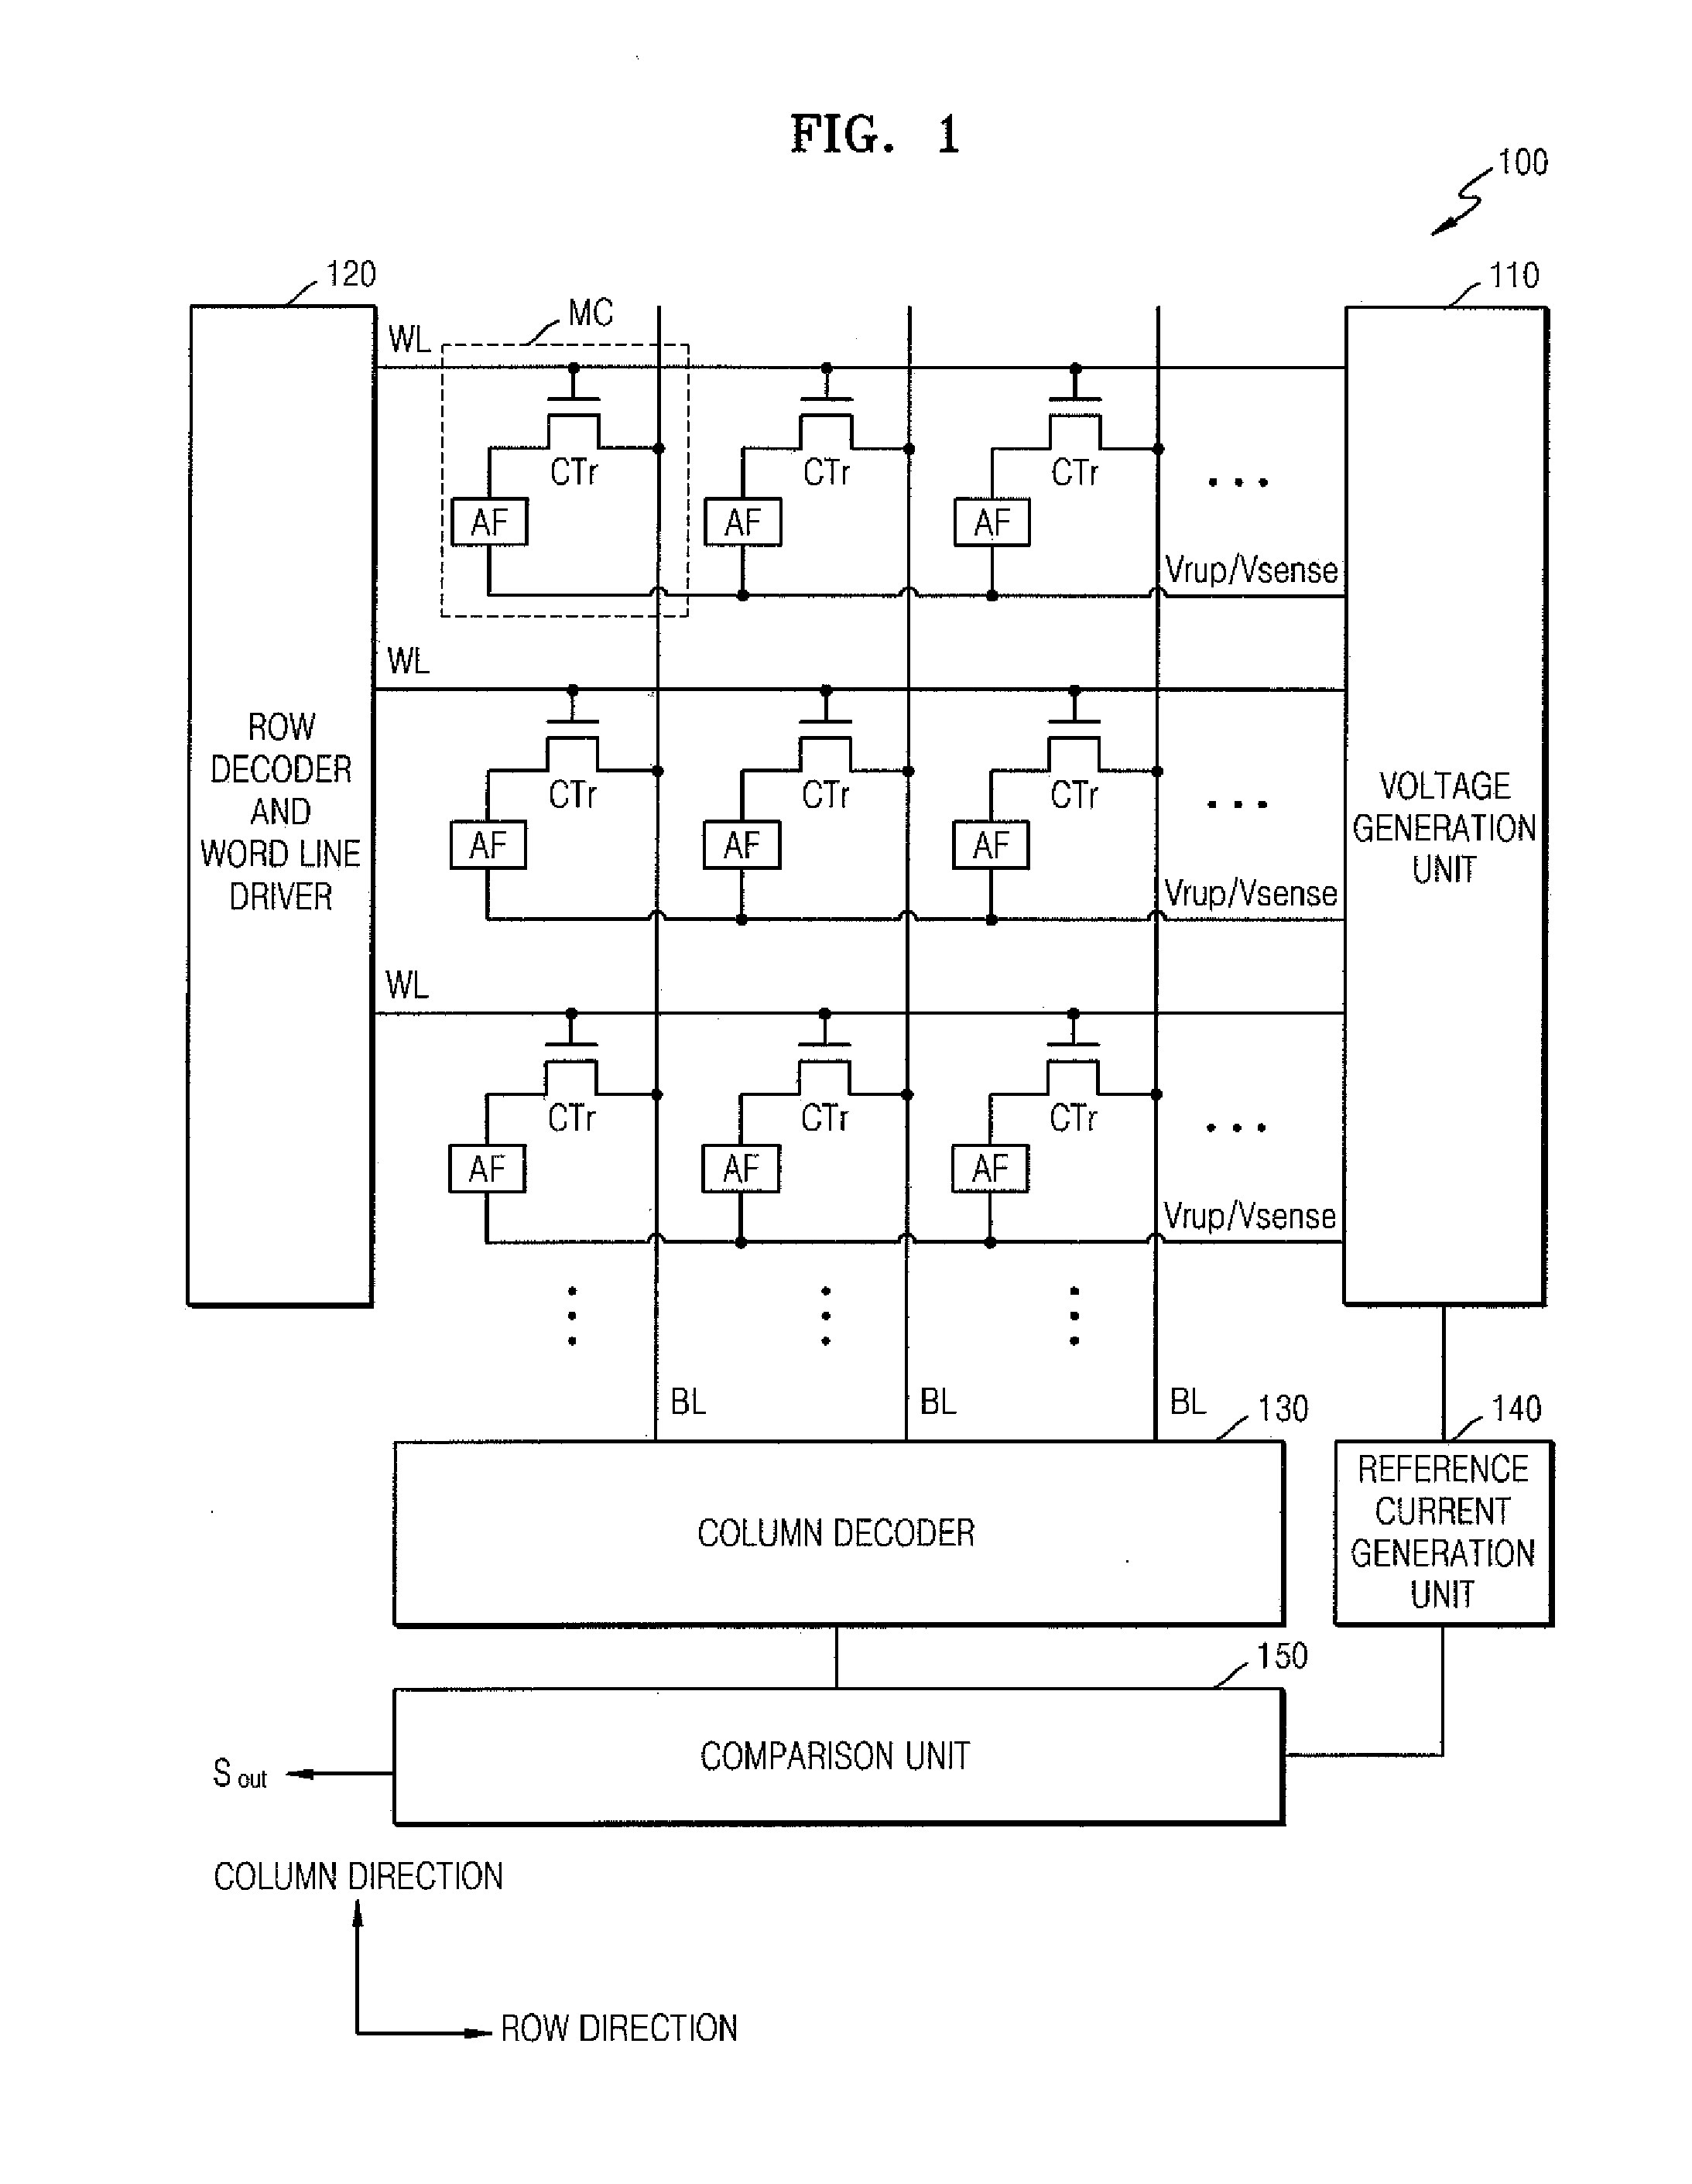 Multi level antifuse memory device and method of operating the same